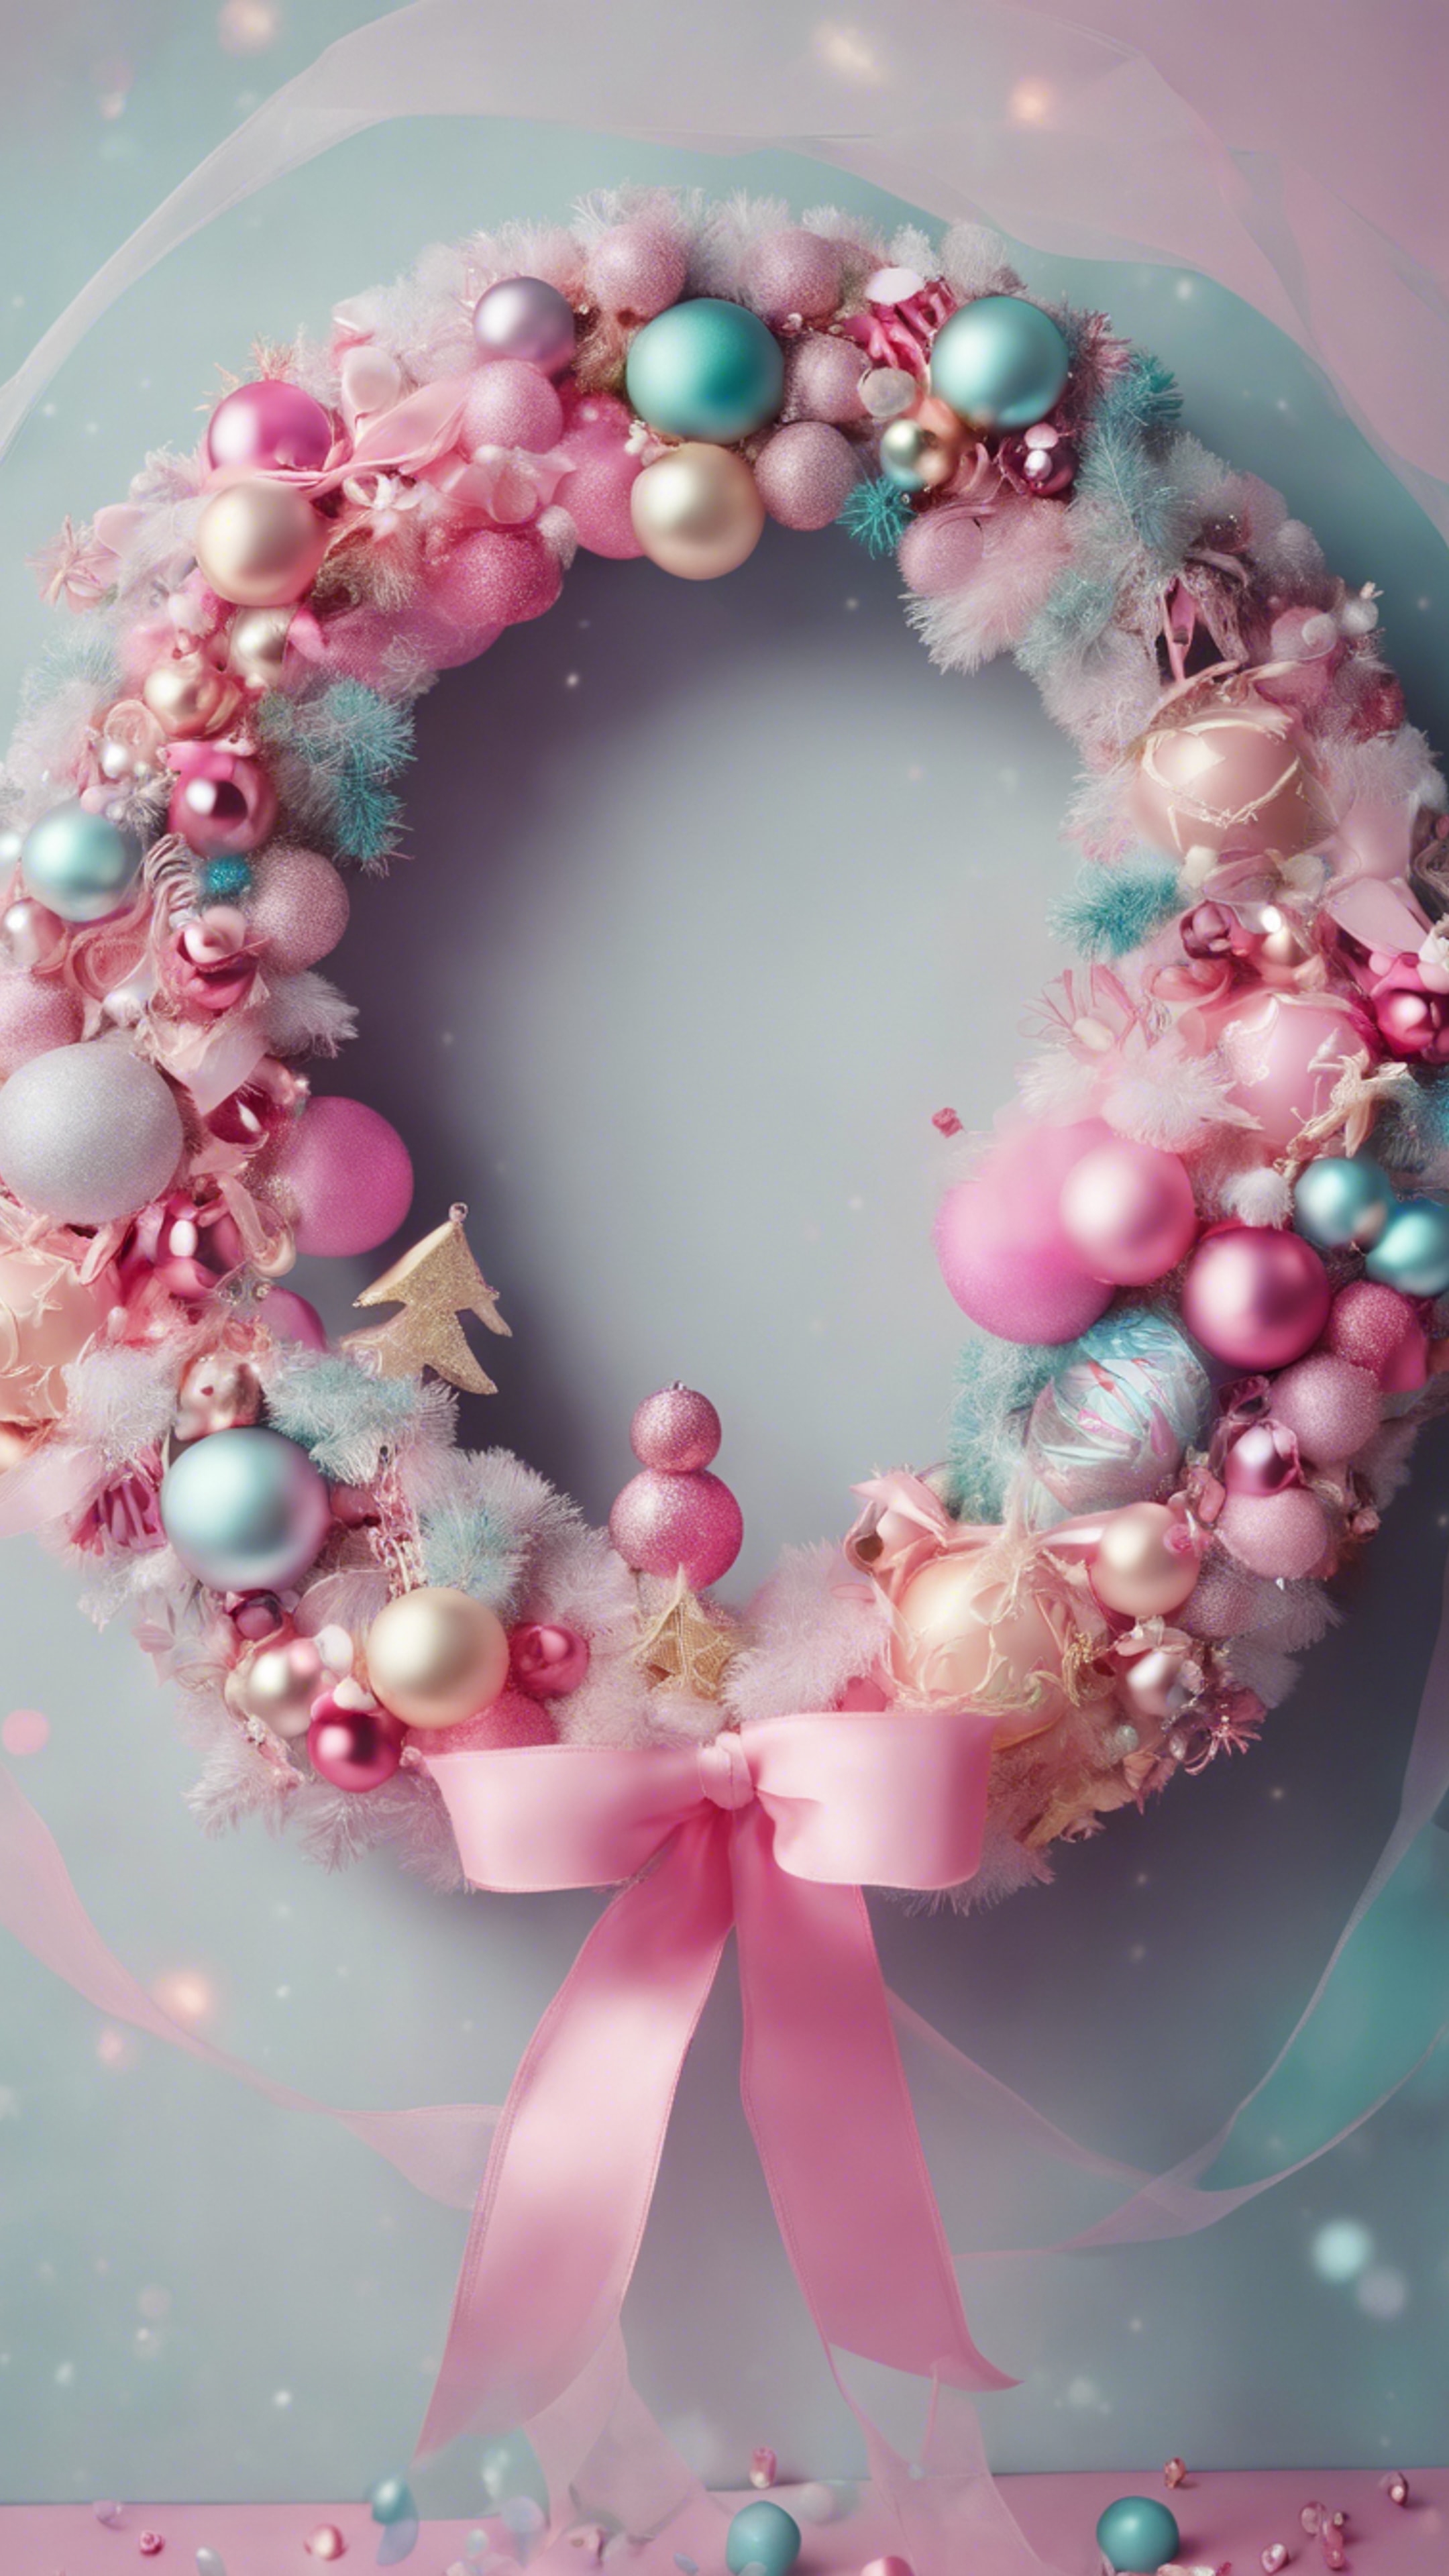 A Kawaii-inspired Christmas wreath adorned with bright pink and pastel ribbons and cute festive ornaments. Hintergrund[4ef6f99b659d4f218ce6]